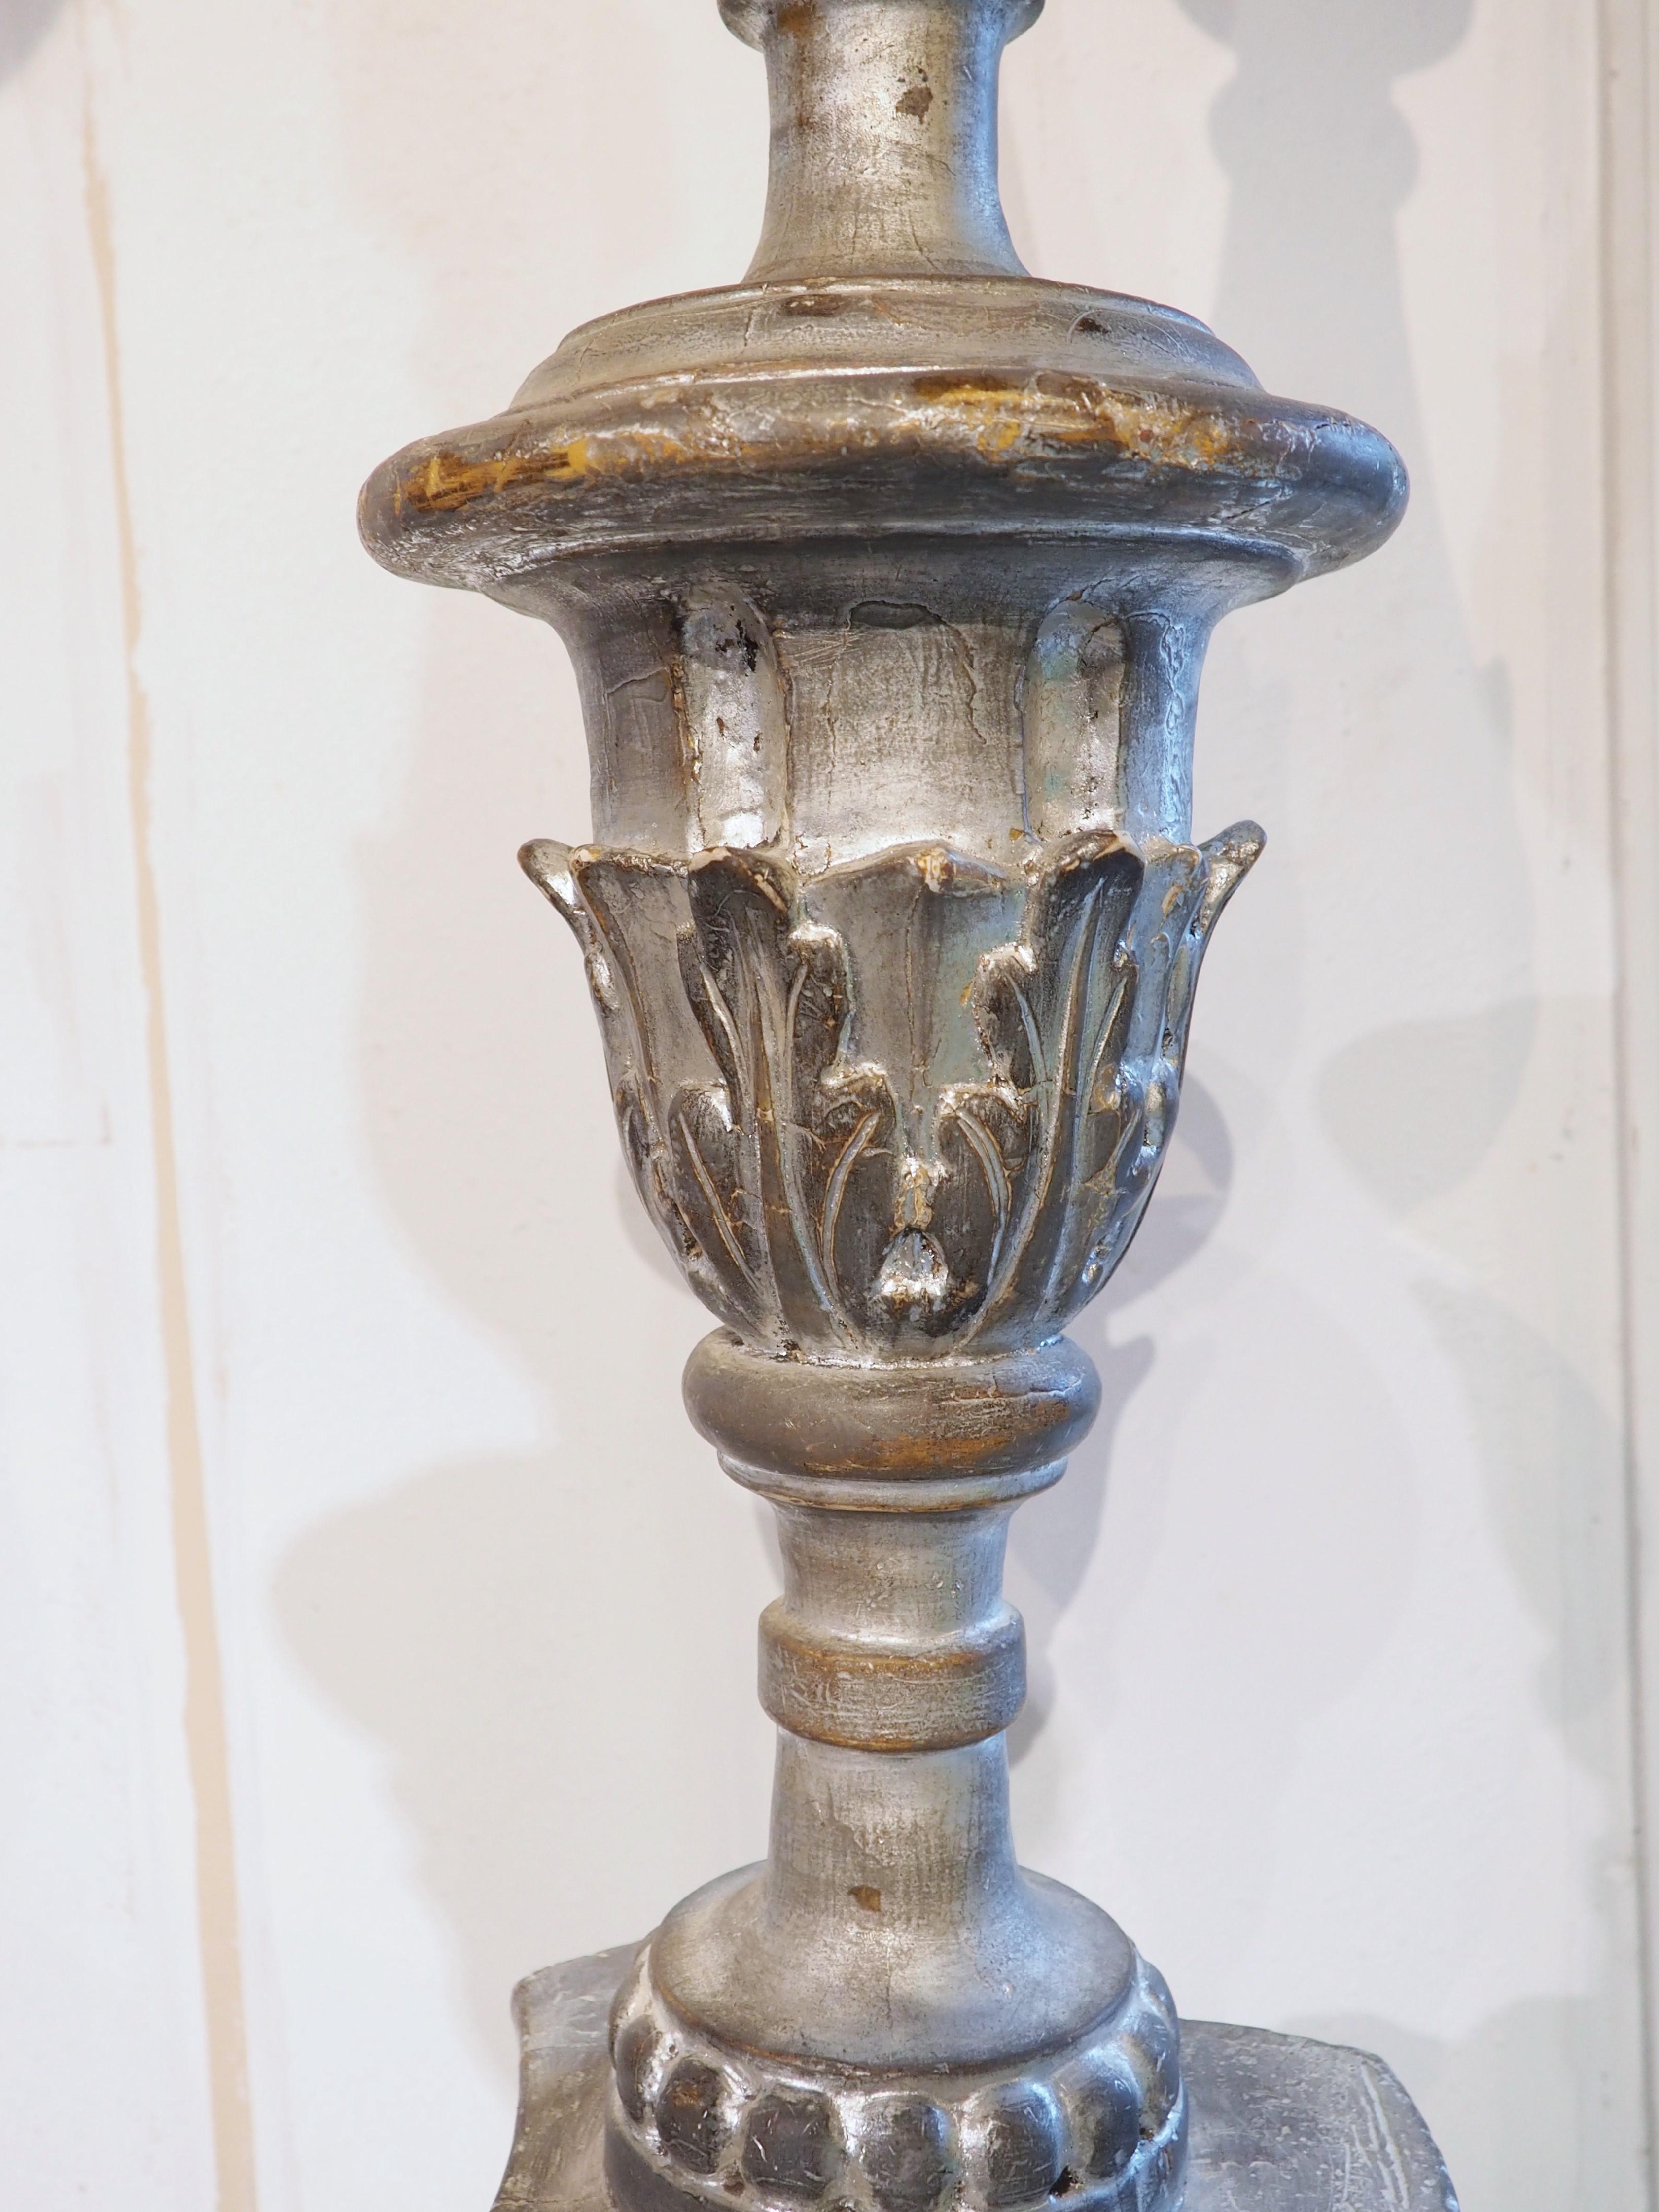 At over six feet tall (both measure around 76 inches), these torchère candlesticks have a commanding presence, enhanced by a silver gilt finish. Hand-carved in Italy, circa 1800, the candlesticks feature various leafy and geometric carvings.

A 2